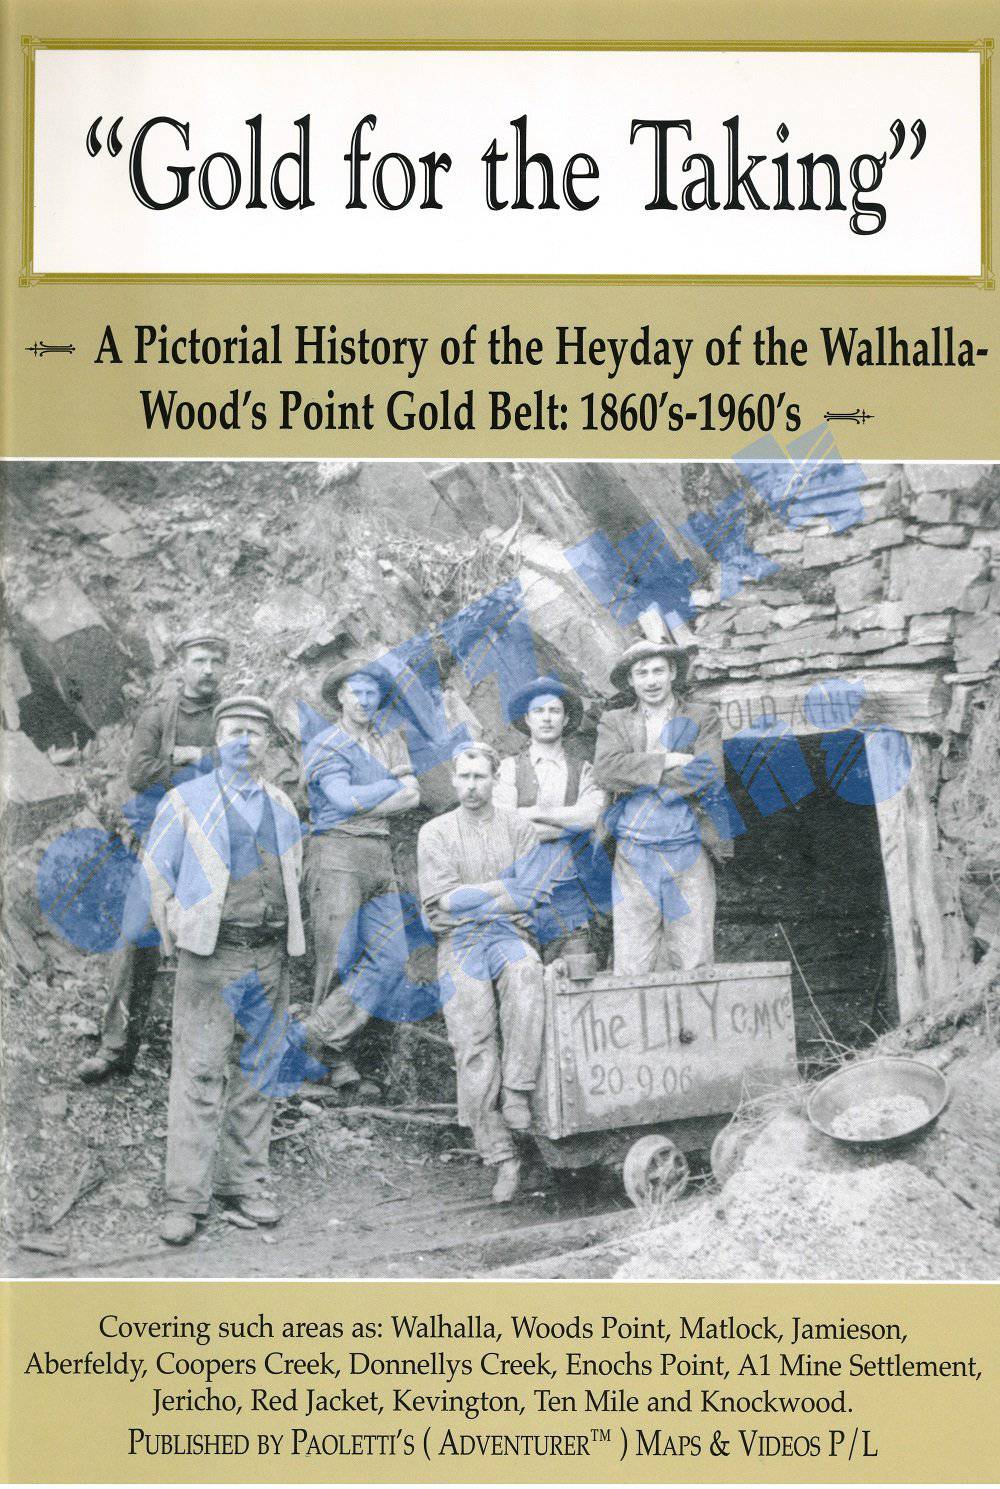 Gold for the Taking- A Pictorial History of the Walhalla-Woods Point GoldBelt in its Heyday 1860's- 1960's | Adventurer Maps